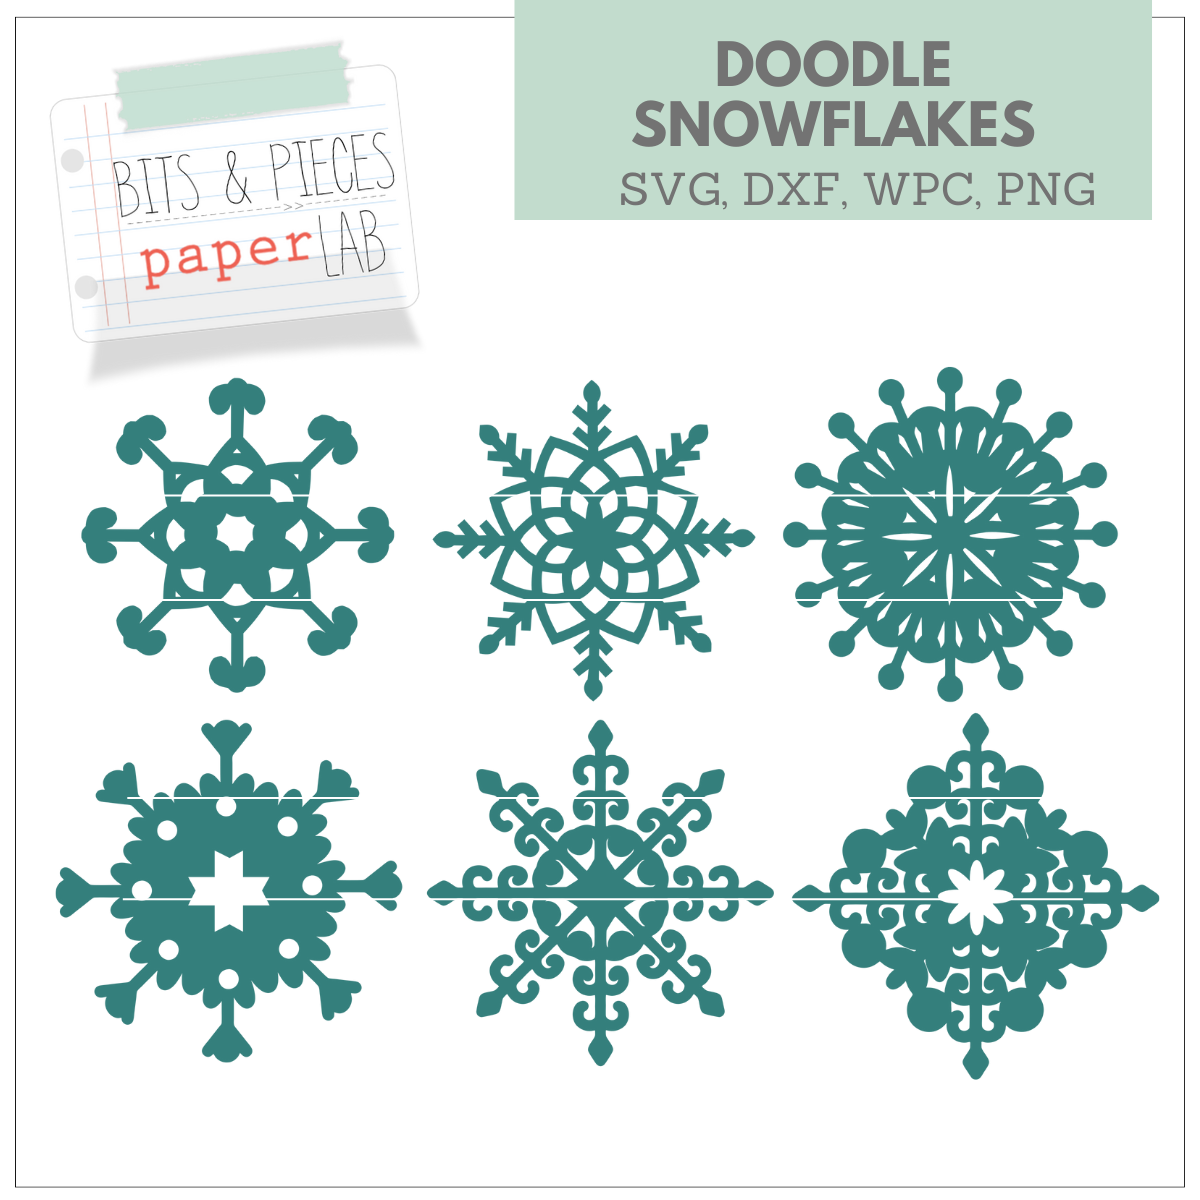 doodle snowflakes svg files for winter handmade cards